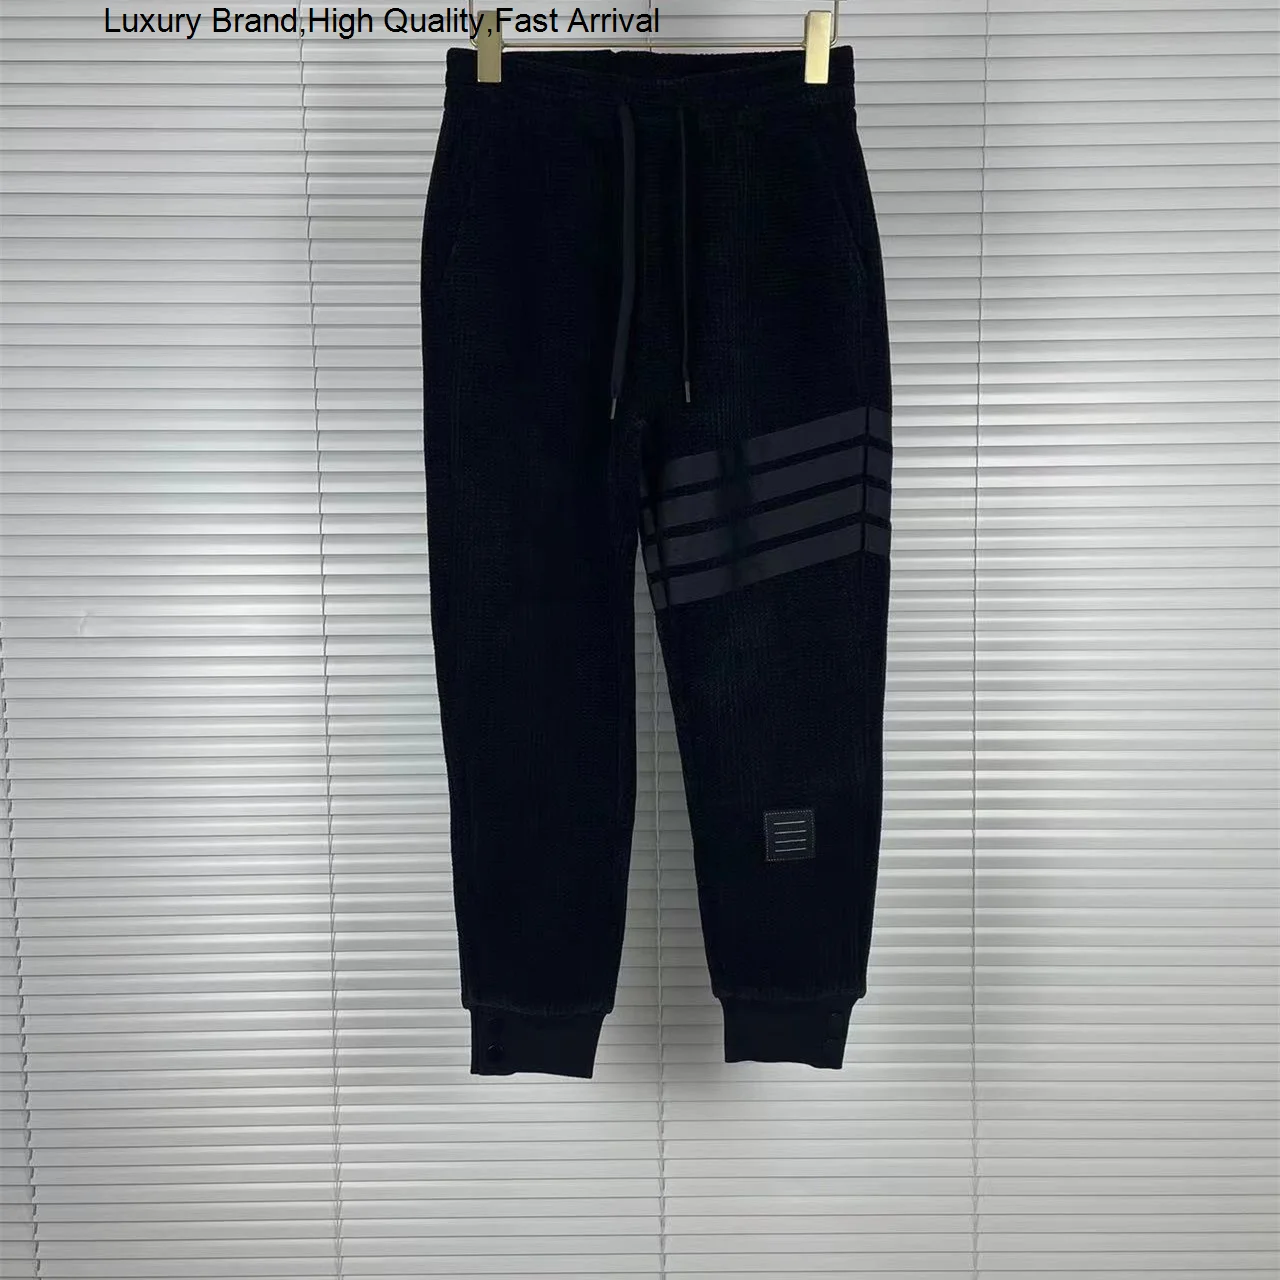 Fashion Korean Brand Black Sports Solid Color Webbing Reflective Design High Quality Corduroy Couple Casual Pants